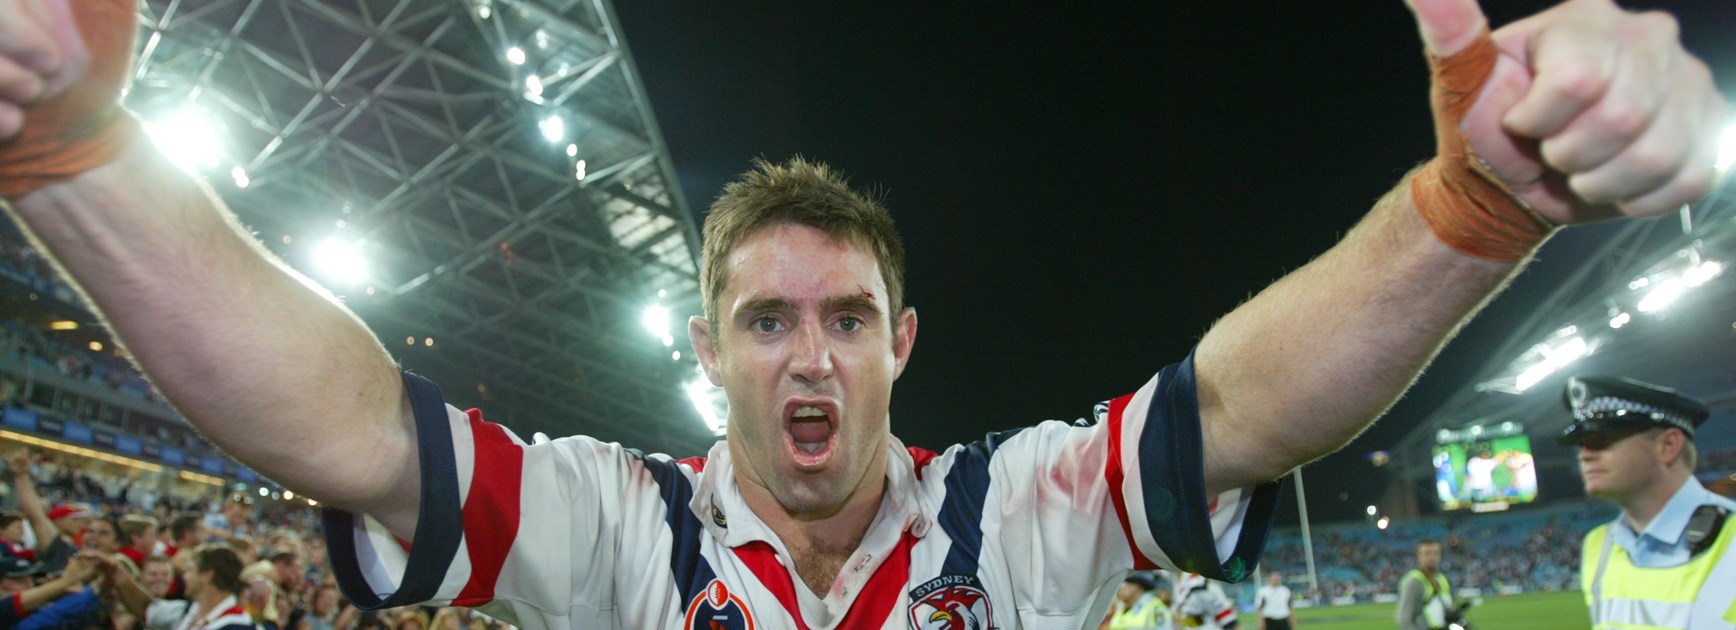 Roosters captain Brad Fittler after the 2002 grand final win.